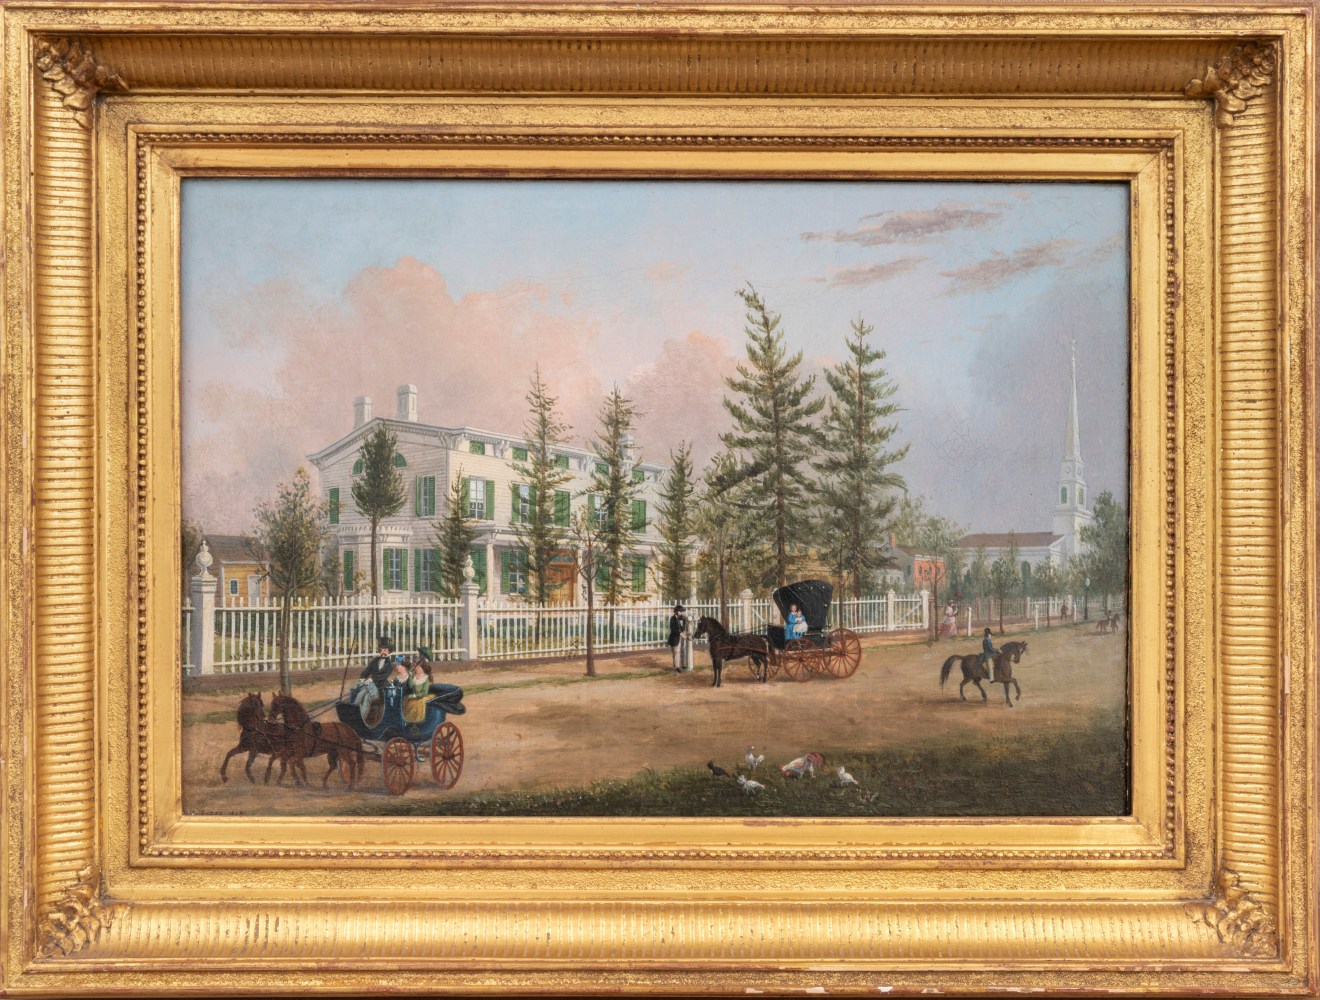 John Evers, Jr. (1797–1884). Front Street, Hempstead, New York, 1870. Oil on canvas. 11 ¾ x 17 in. Unsigned (framed)